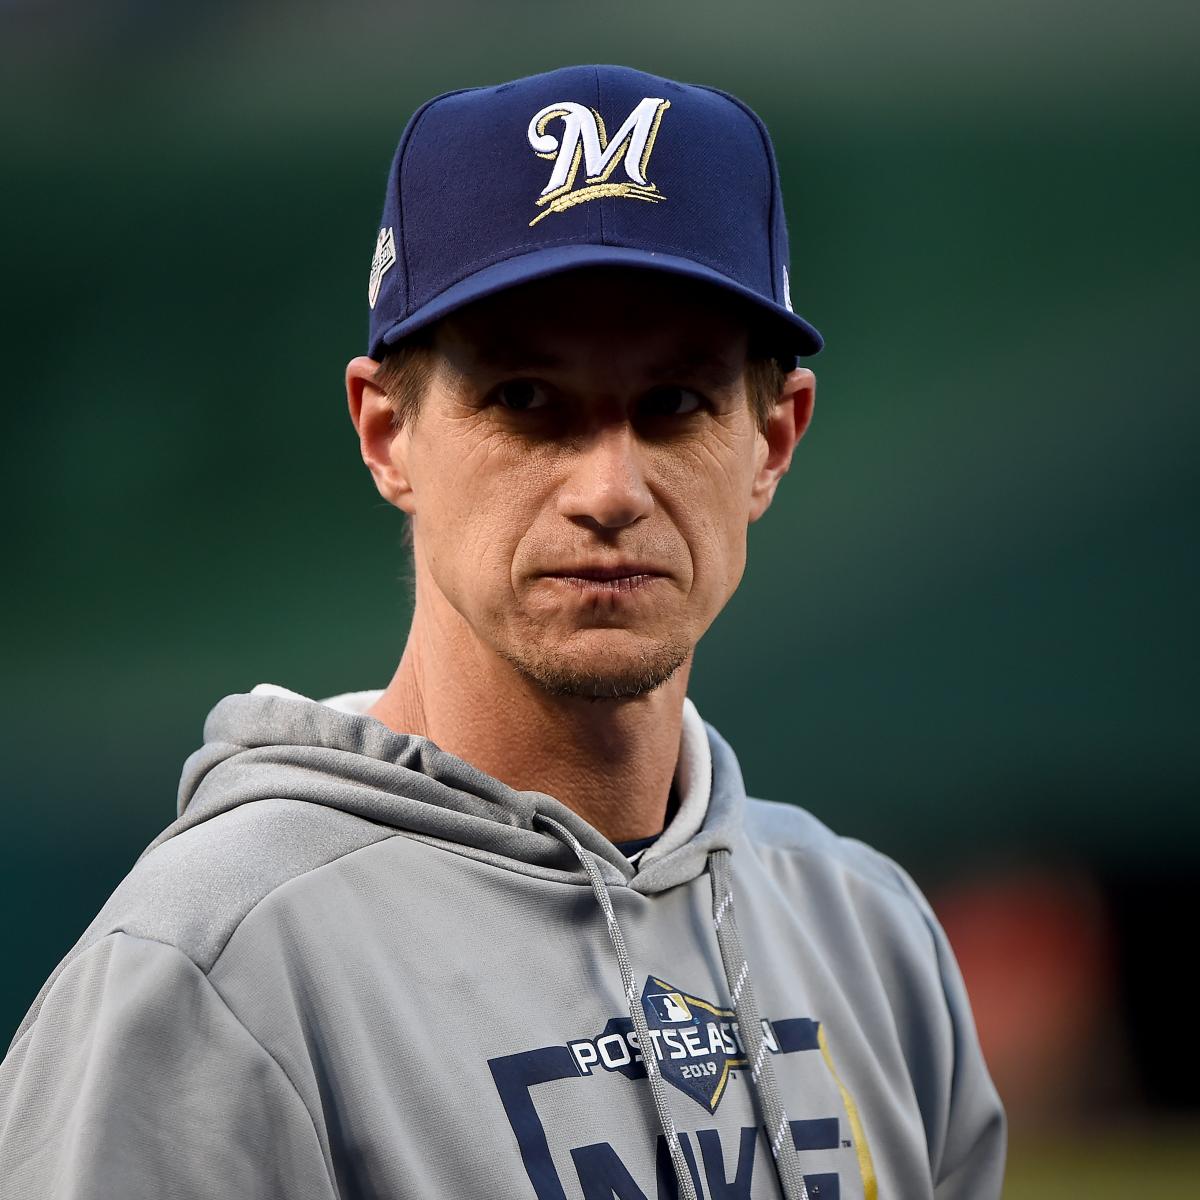 Craig Counsell, Brewers Agree to Contract Extension Through 2023 News